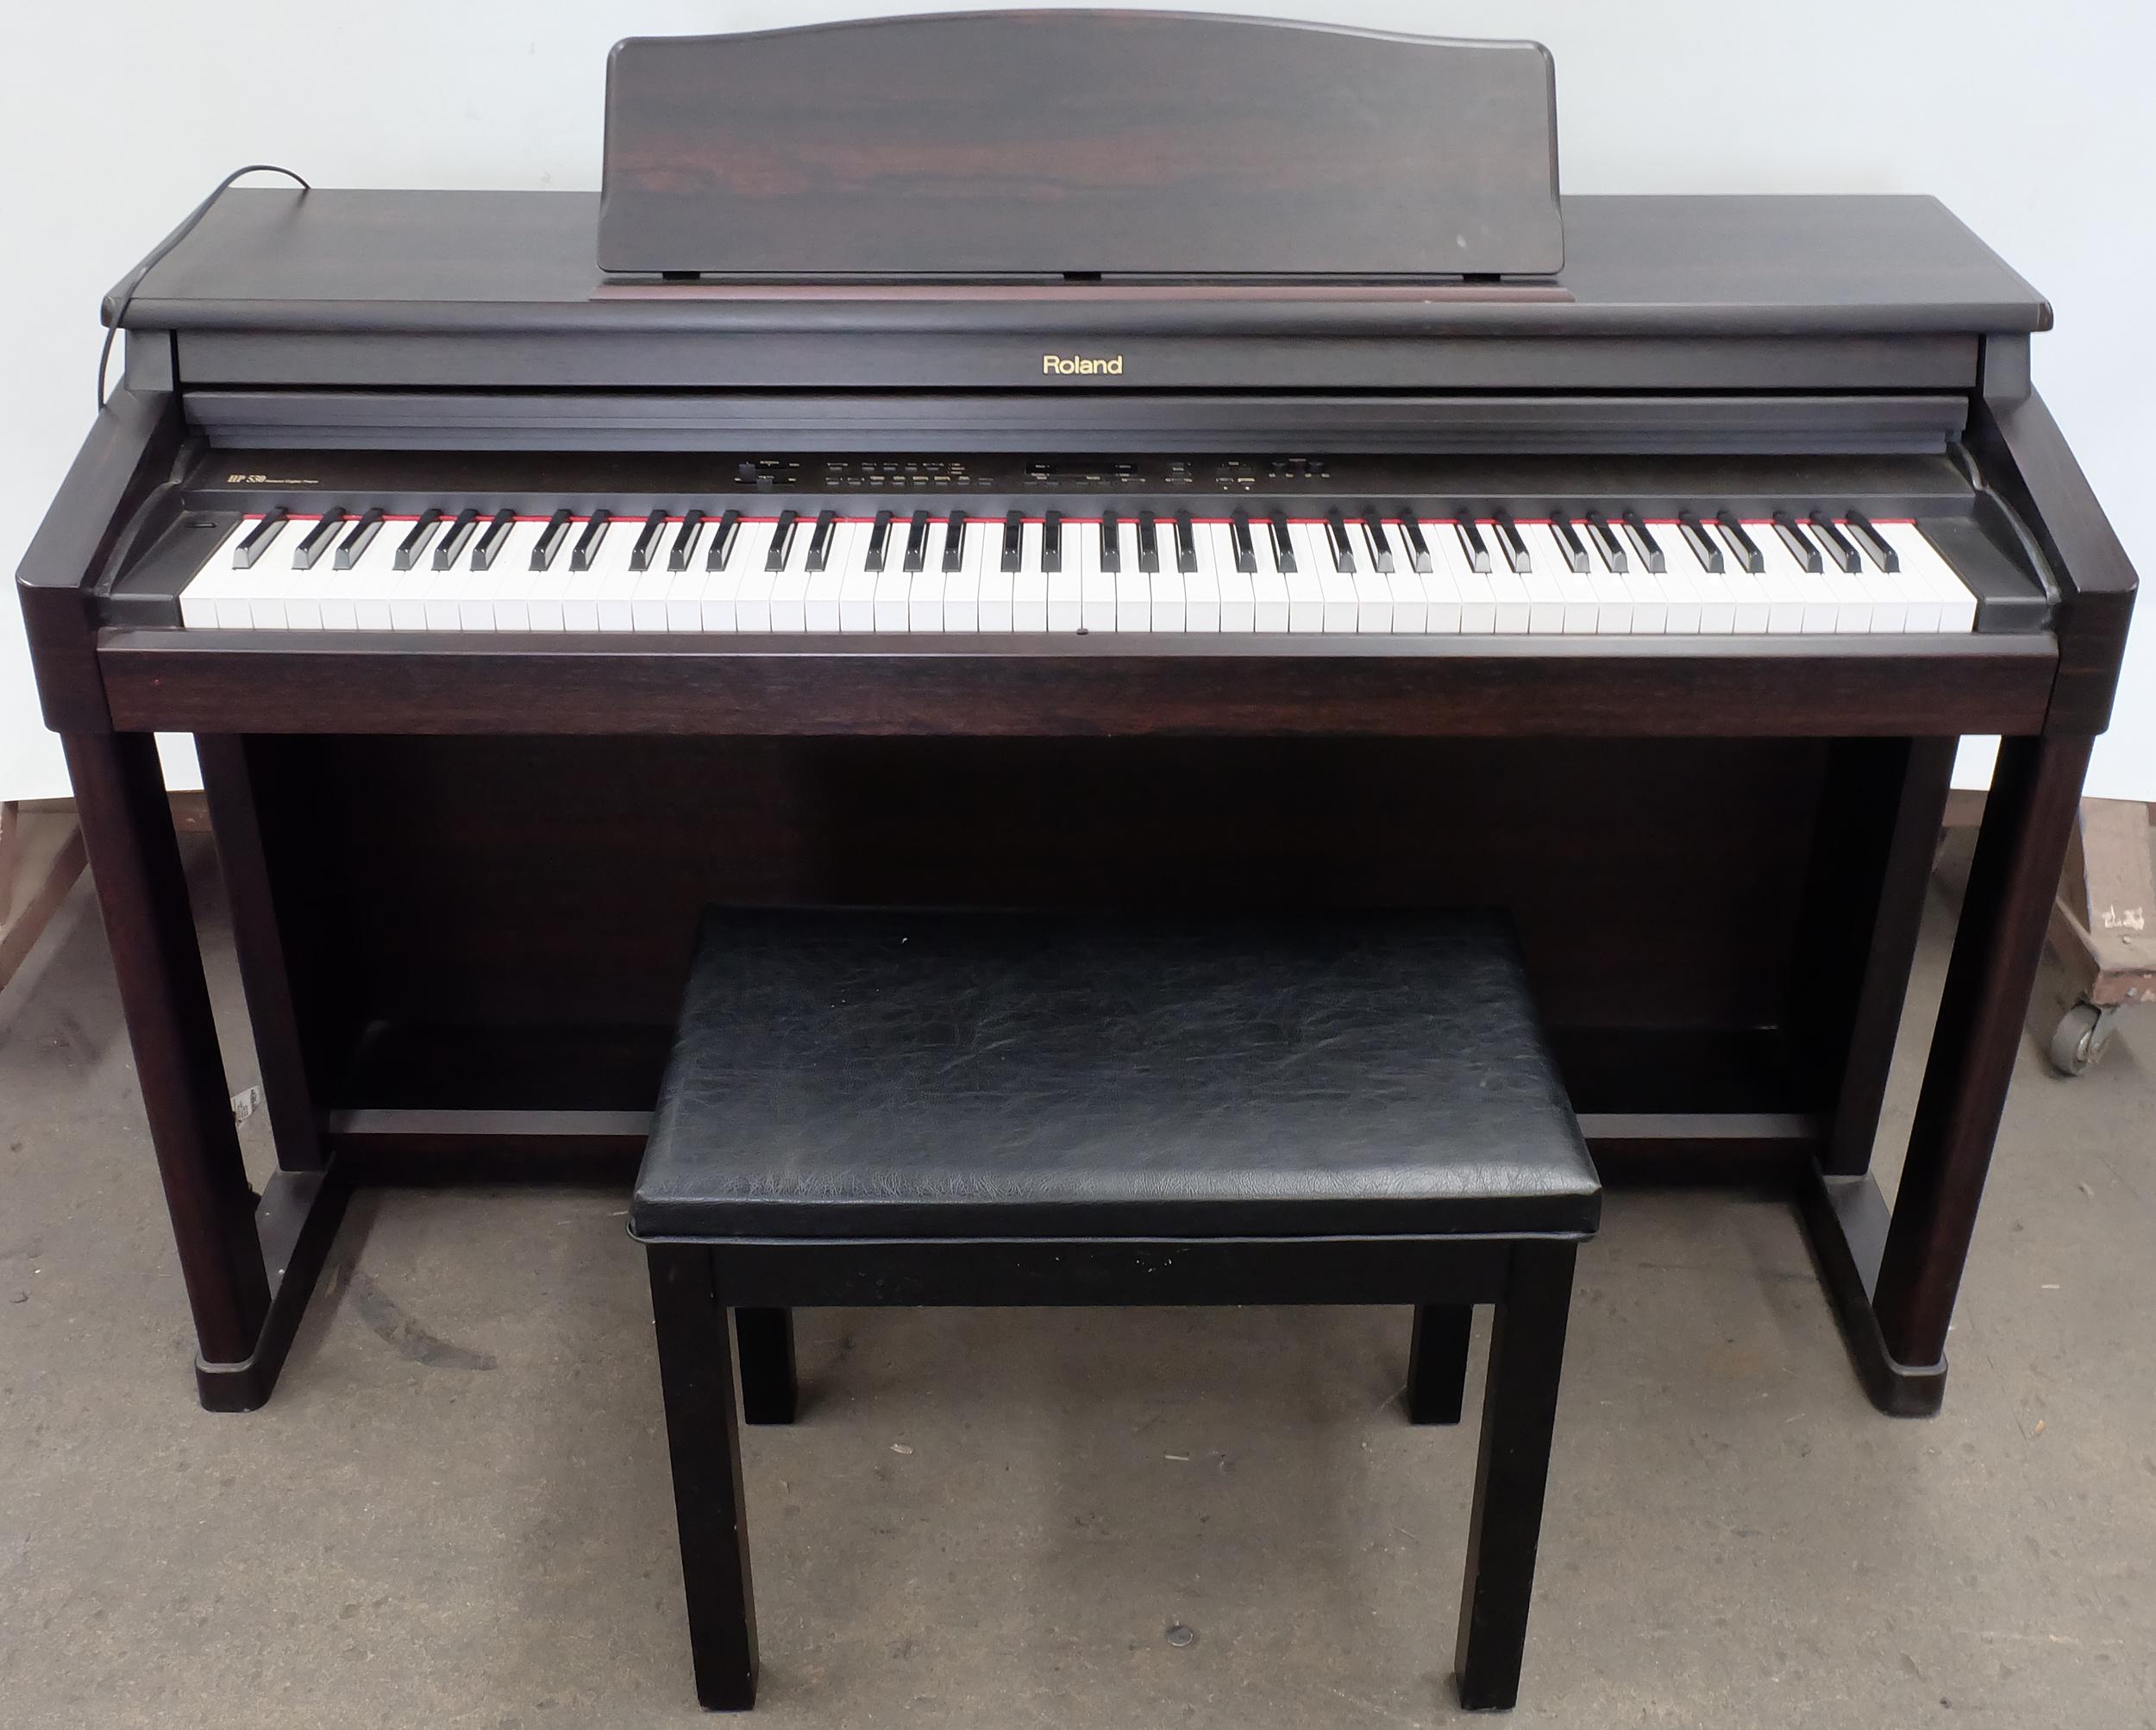 Roland HP 530 Digital Piano with - Lot 1138304 | ALLBIDS